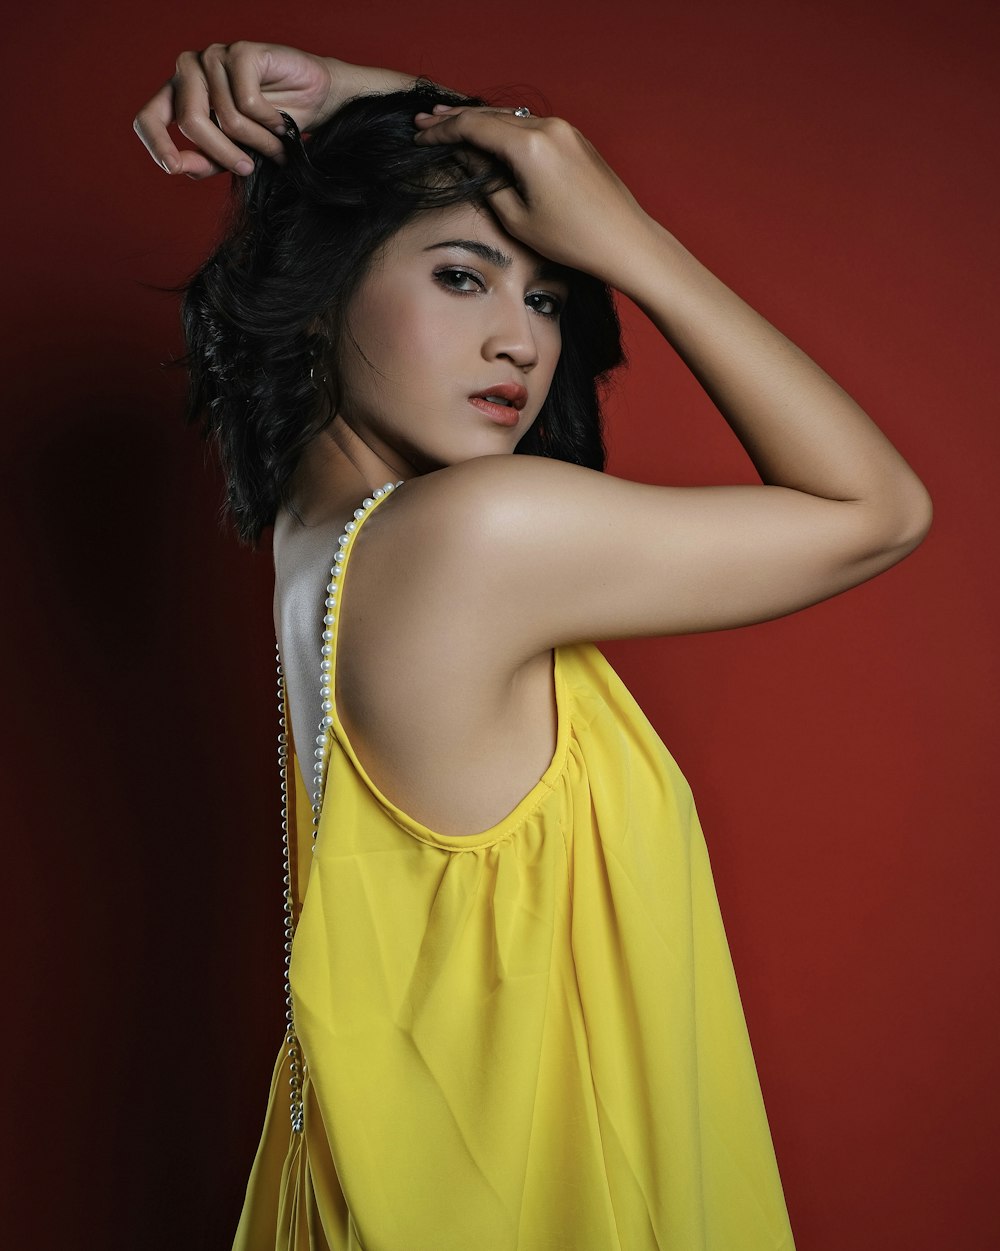 a woman in a yellow dress posing for a picture